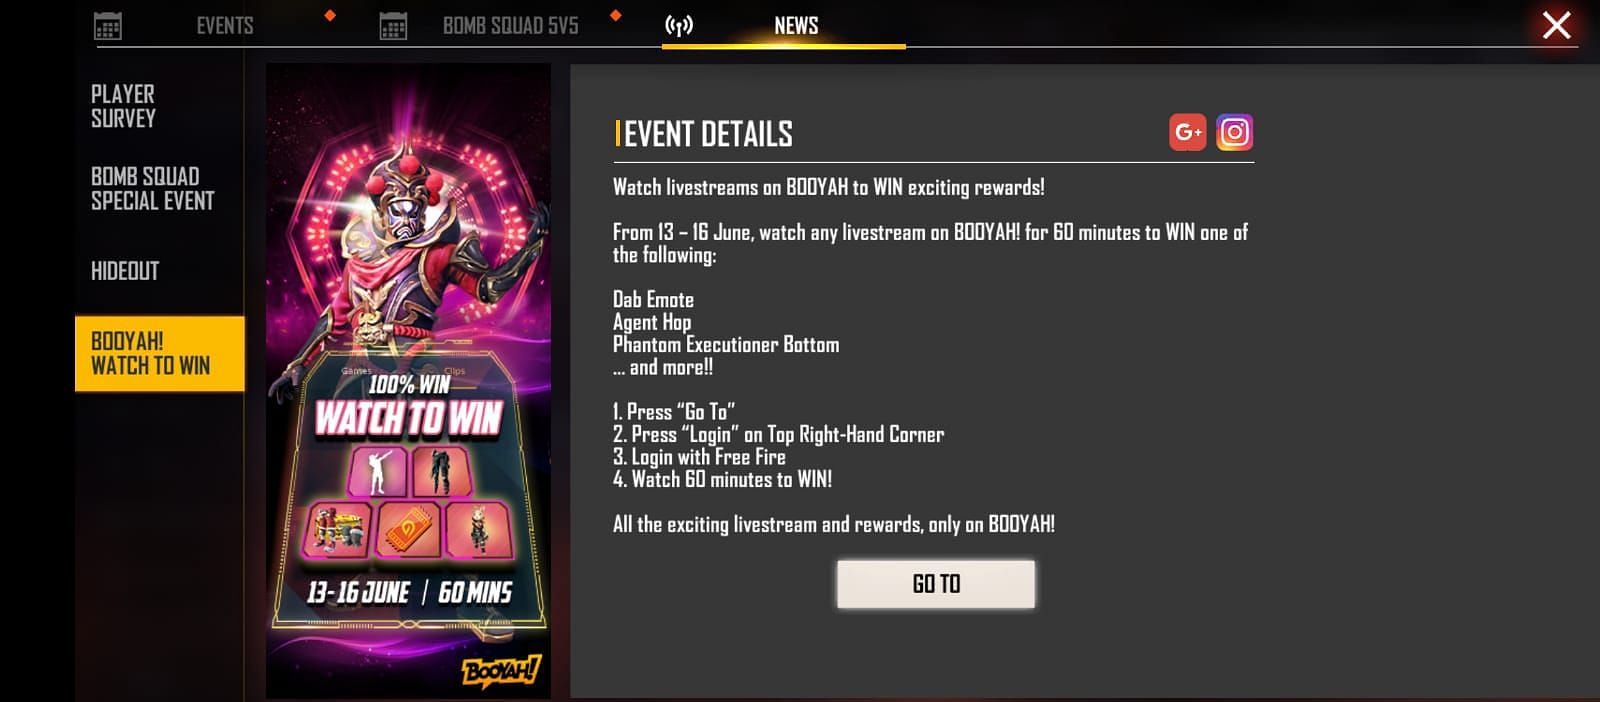 Rewards offered by the game via the Watch to Win event (Image via Garena)